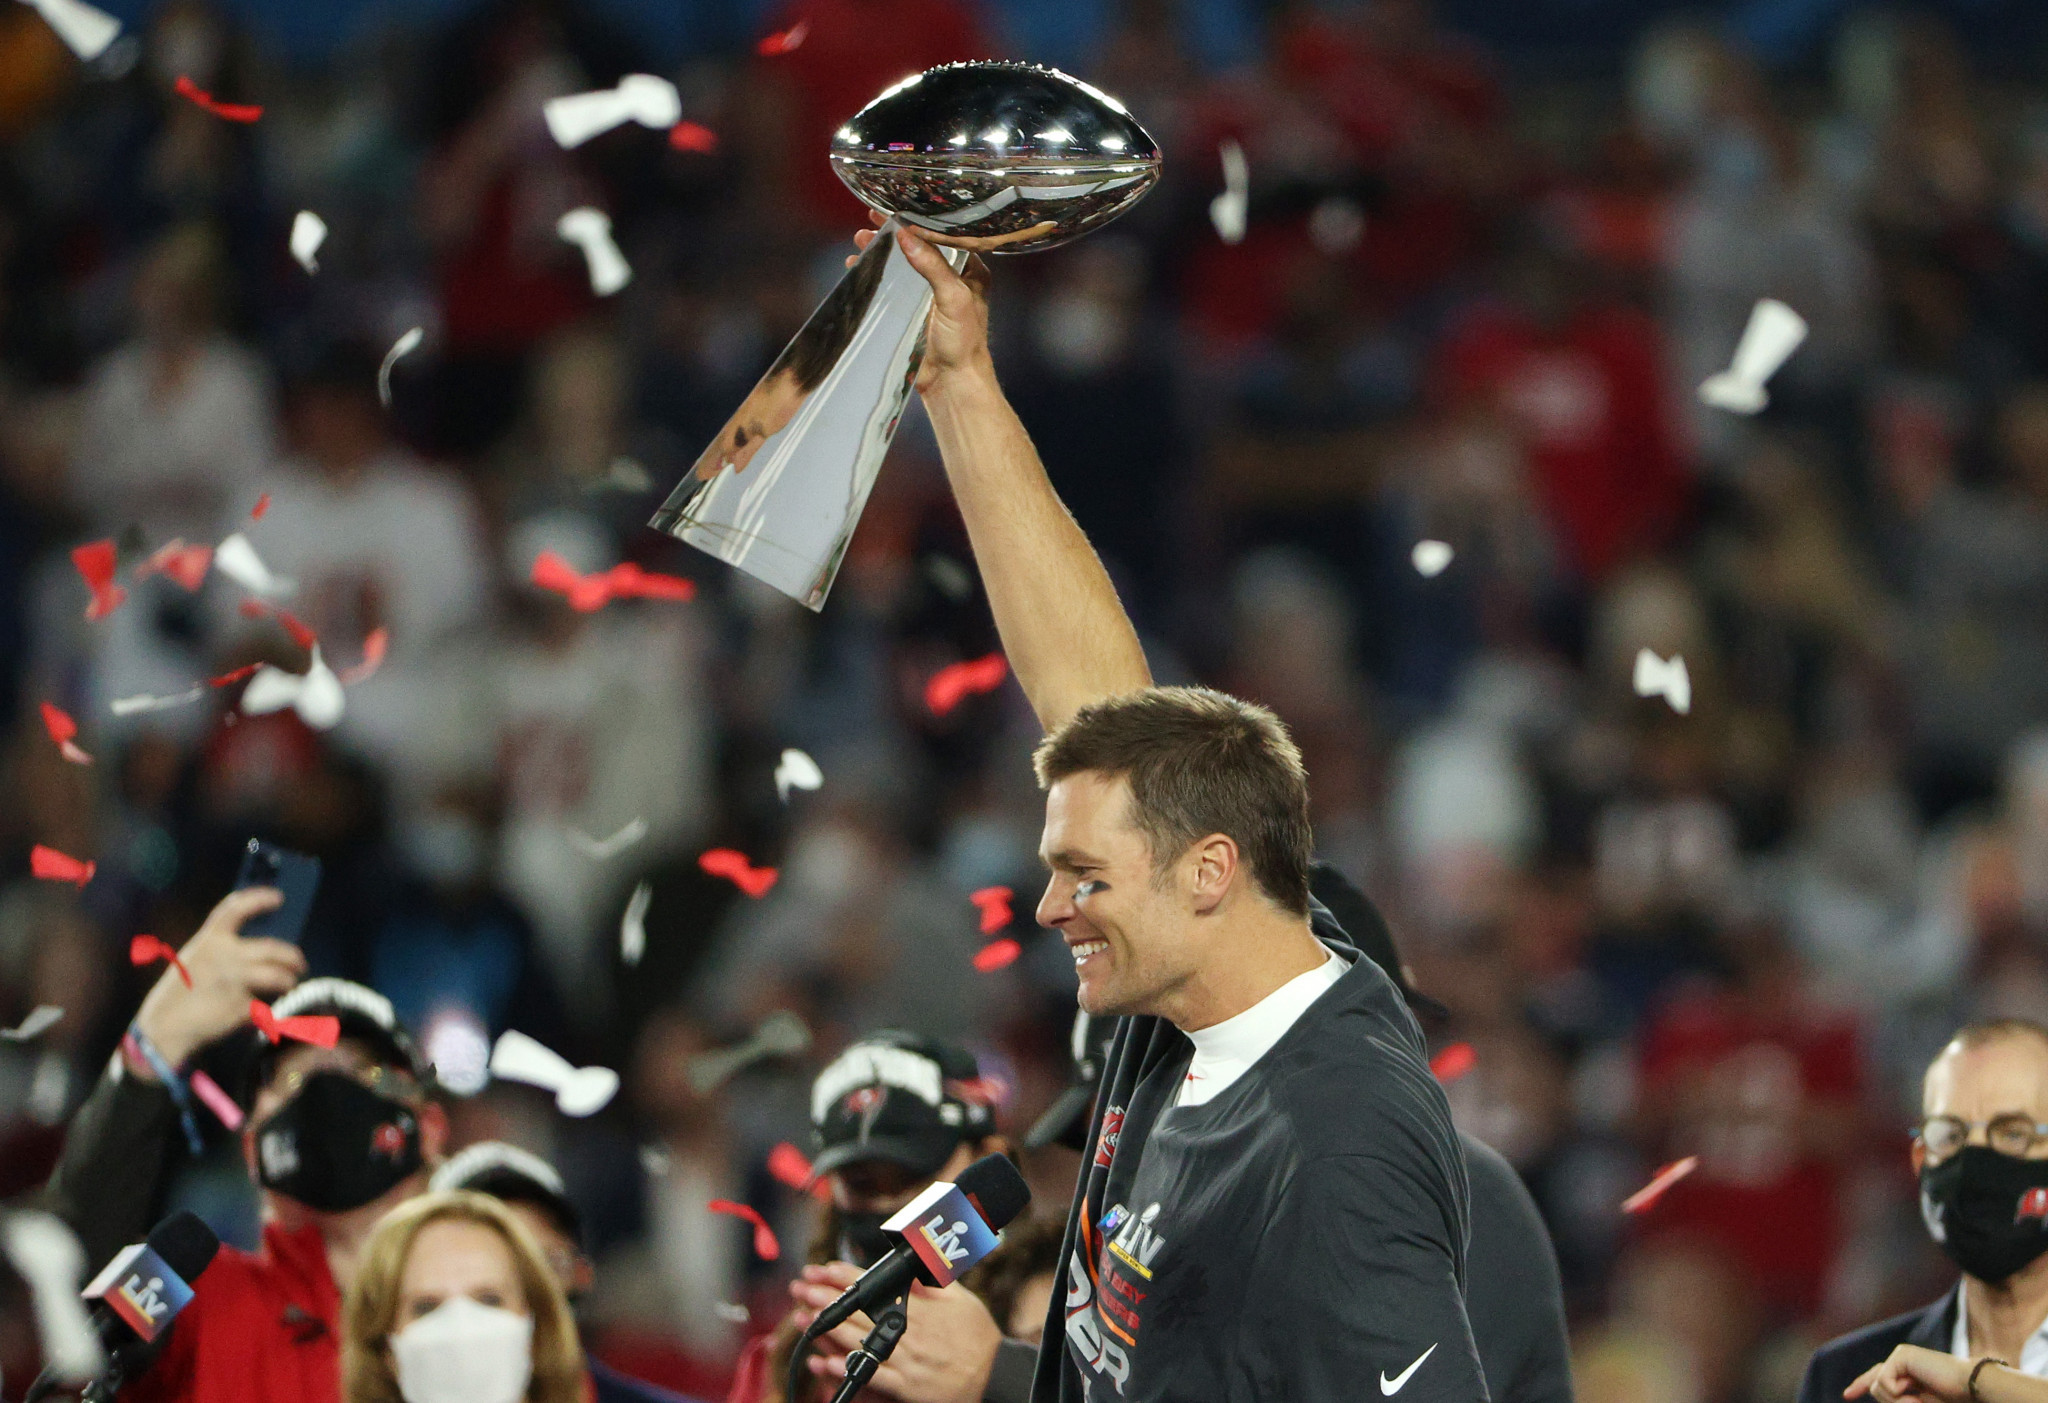 Tom Brady is shortlisted for the Laureus Sportsman of the Year Award after winning his seventh Super Bowl in 2021 ©Getty Images